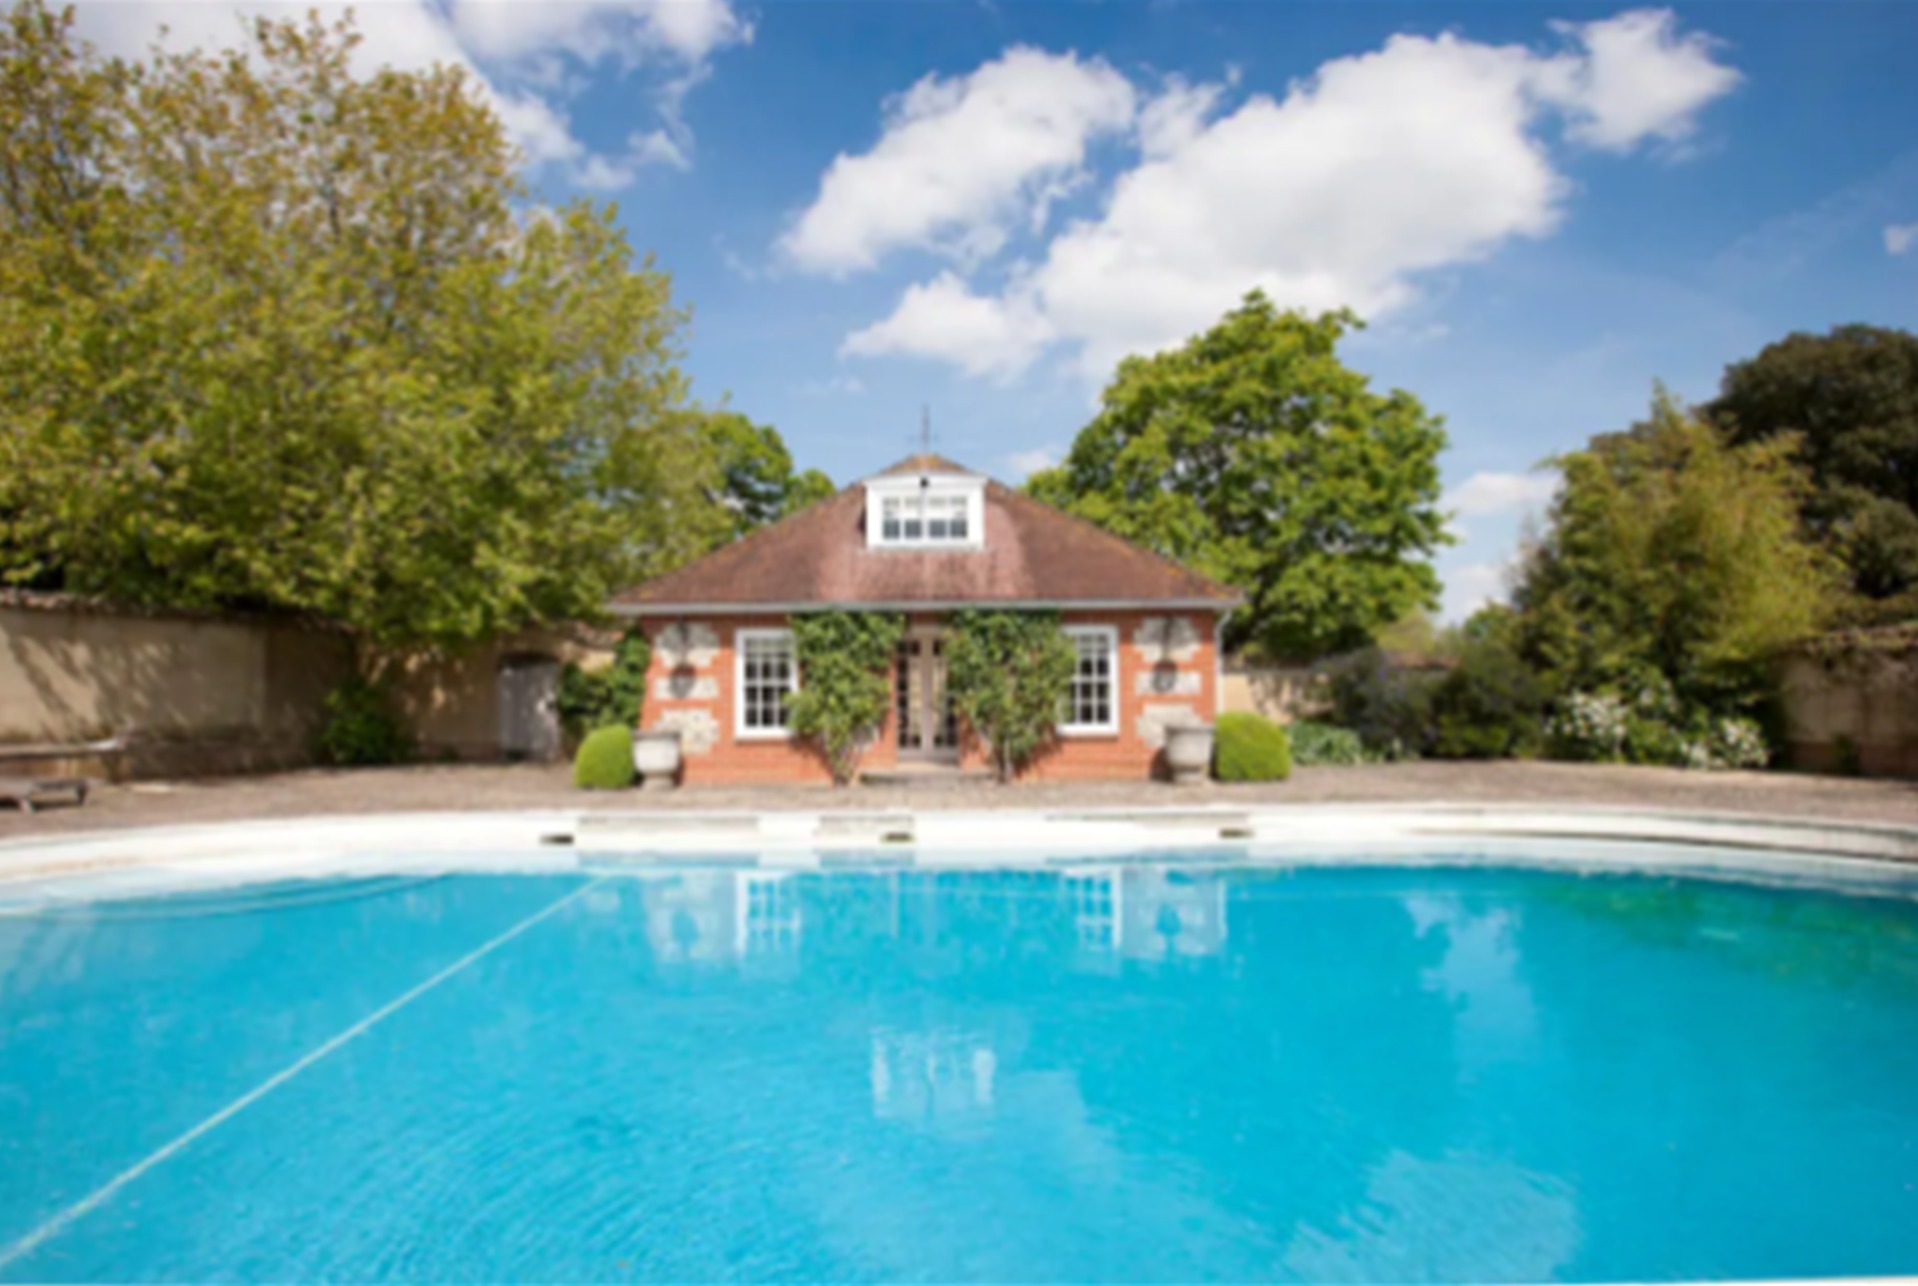 Four-bedroom country house and its pool in Amesbury